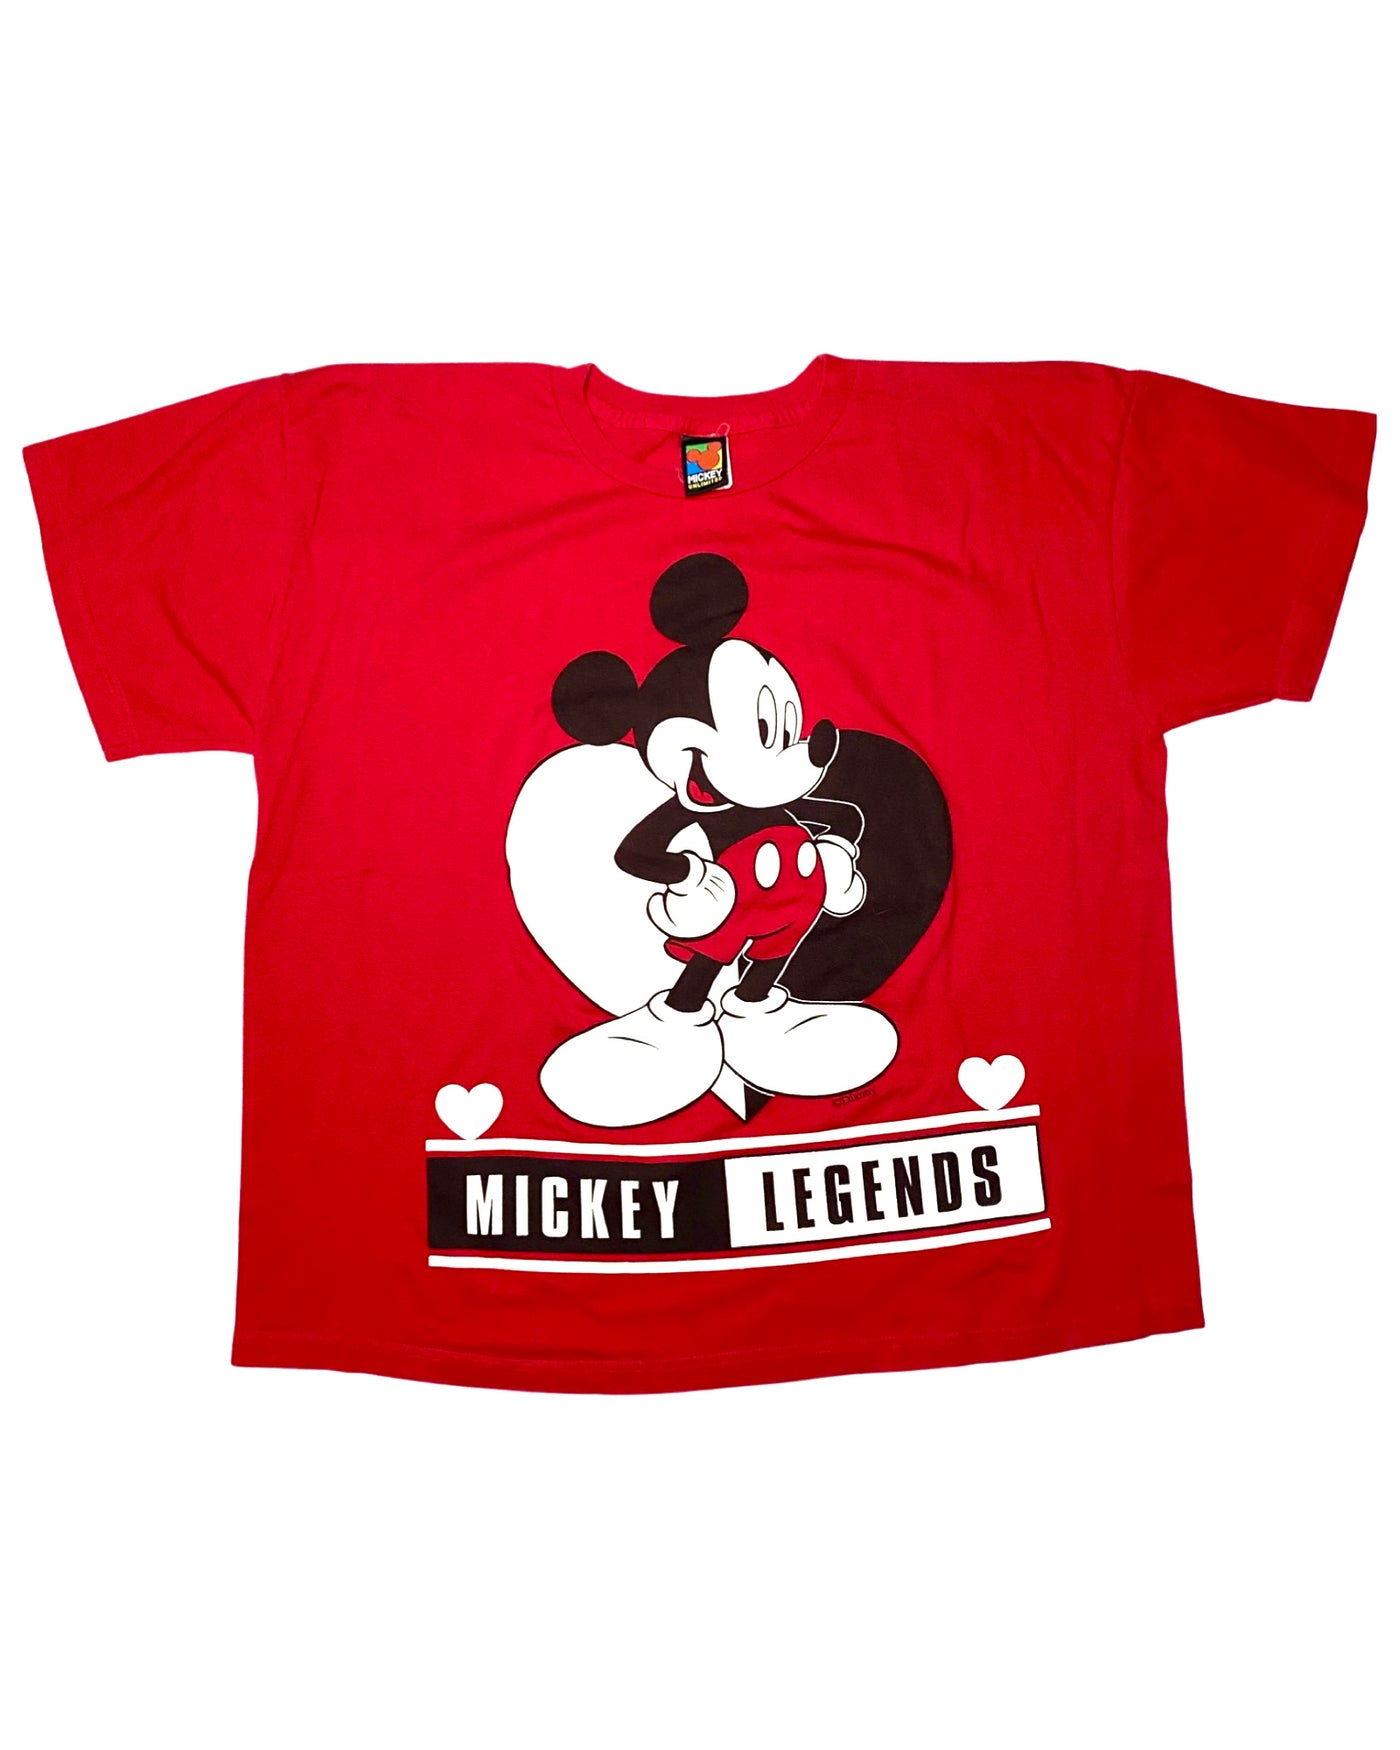 Vintage 90s Mickey Unlimited T-Shirt